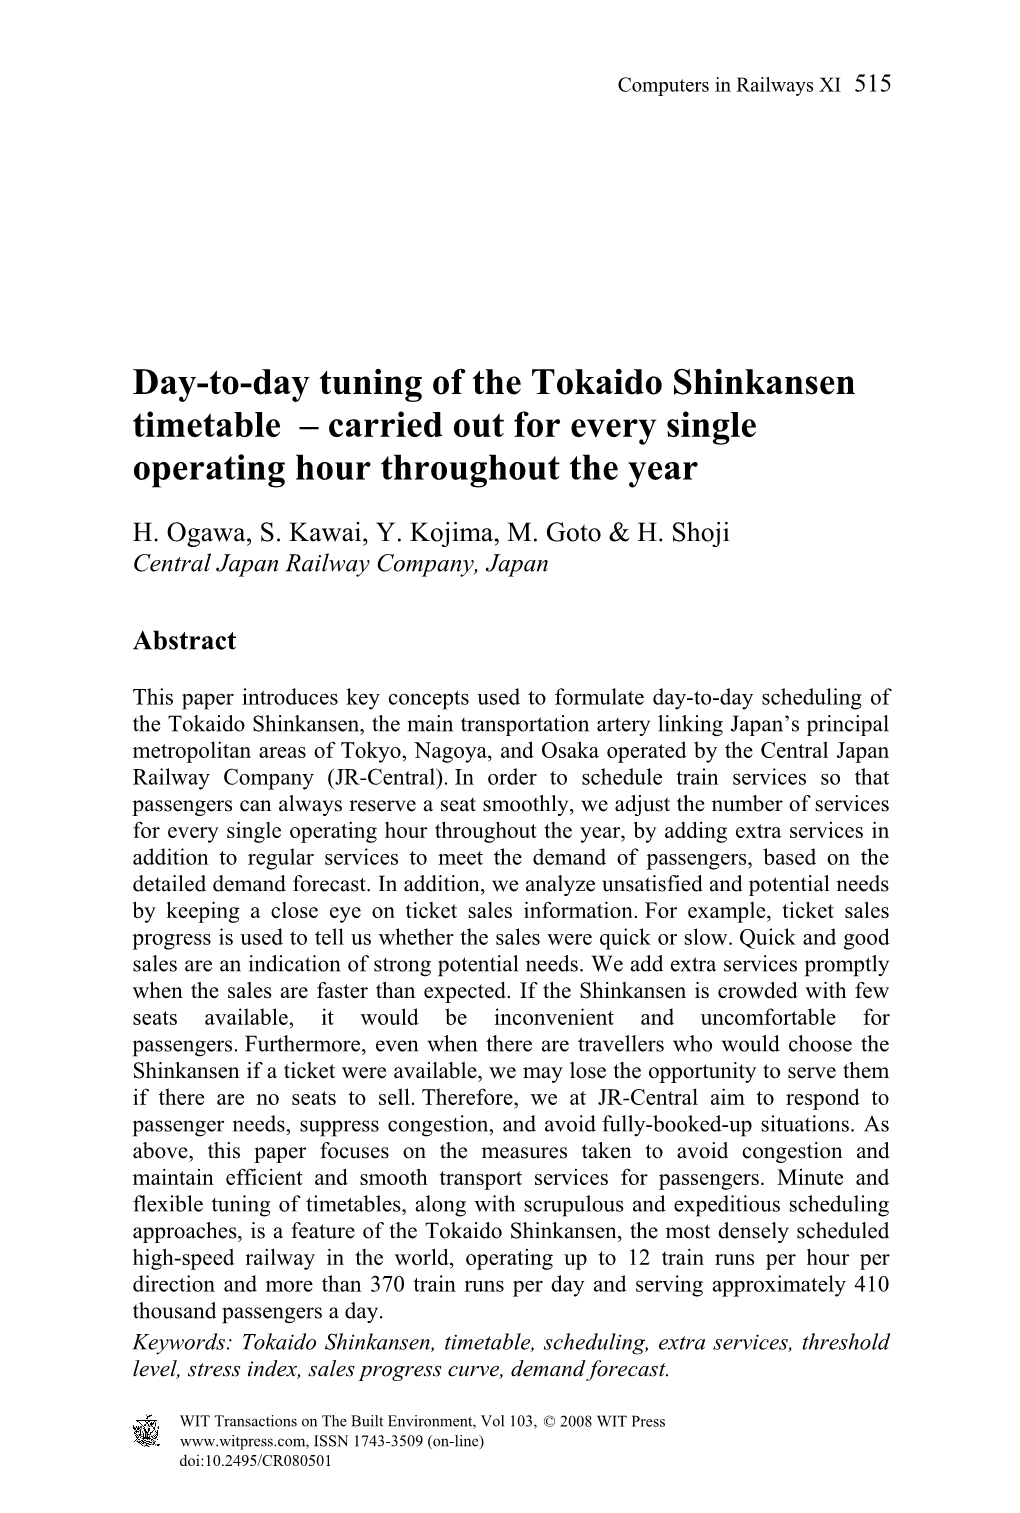 Day-To-Day Tuning of the Tokaido Shinkansen Timetable – Carried out for Every Single Operating Hour Throughout the Year